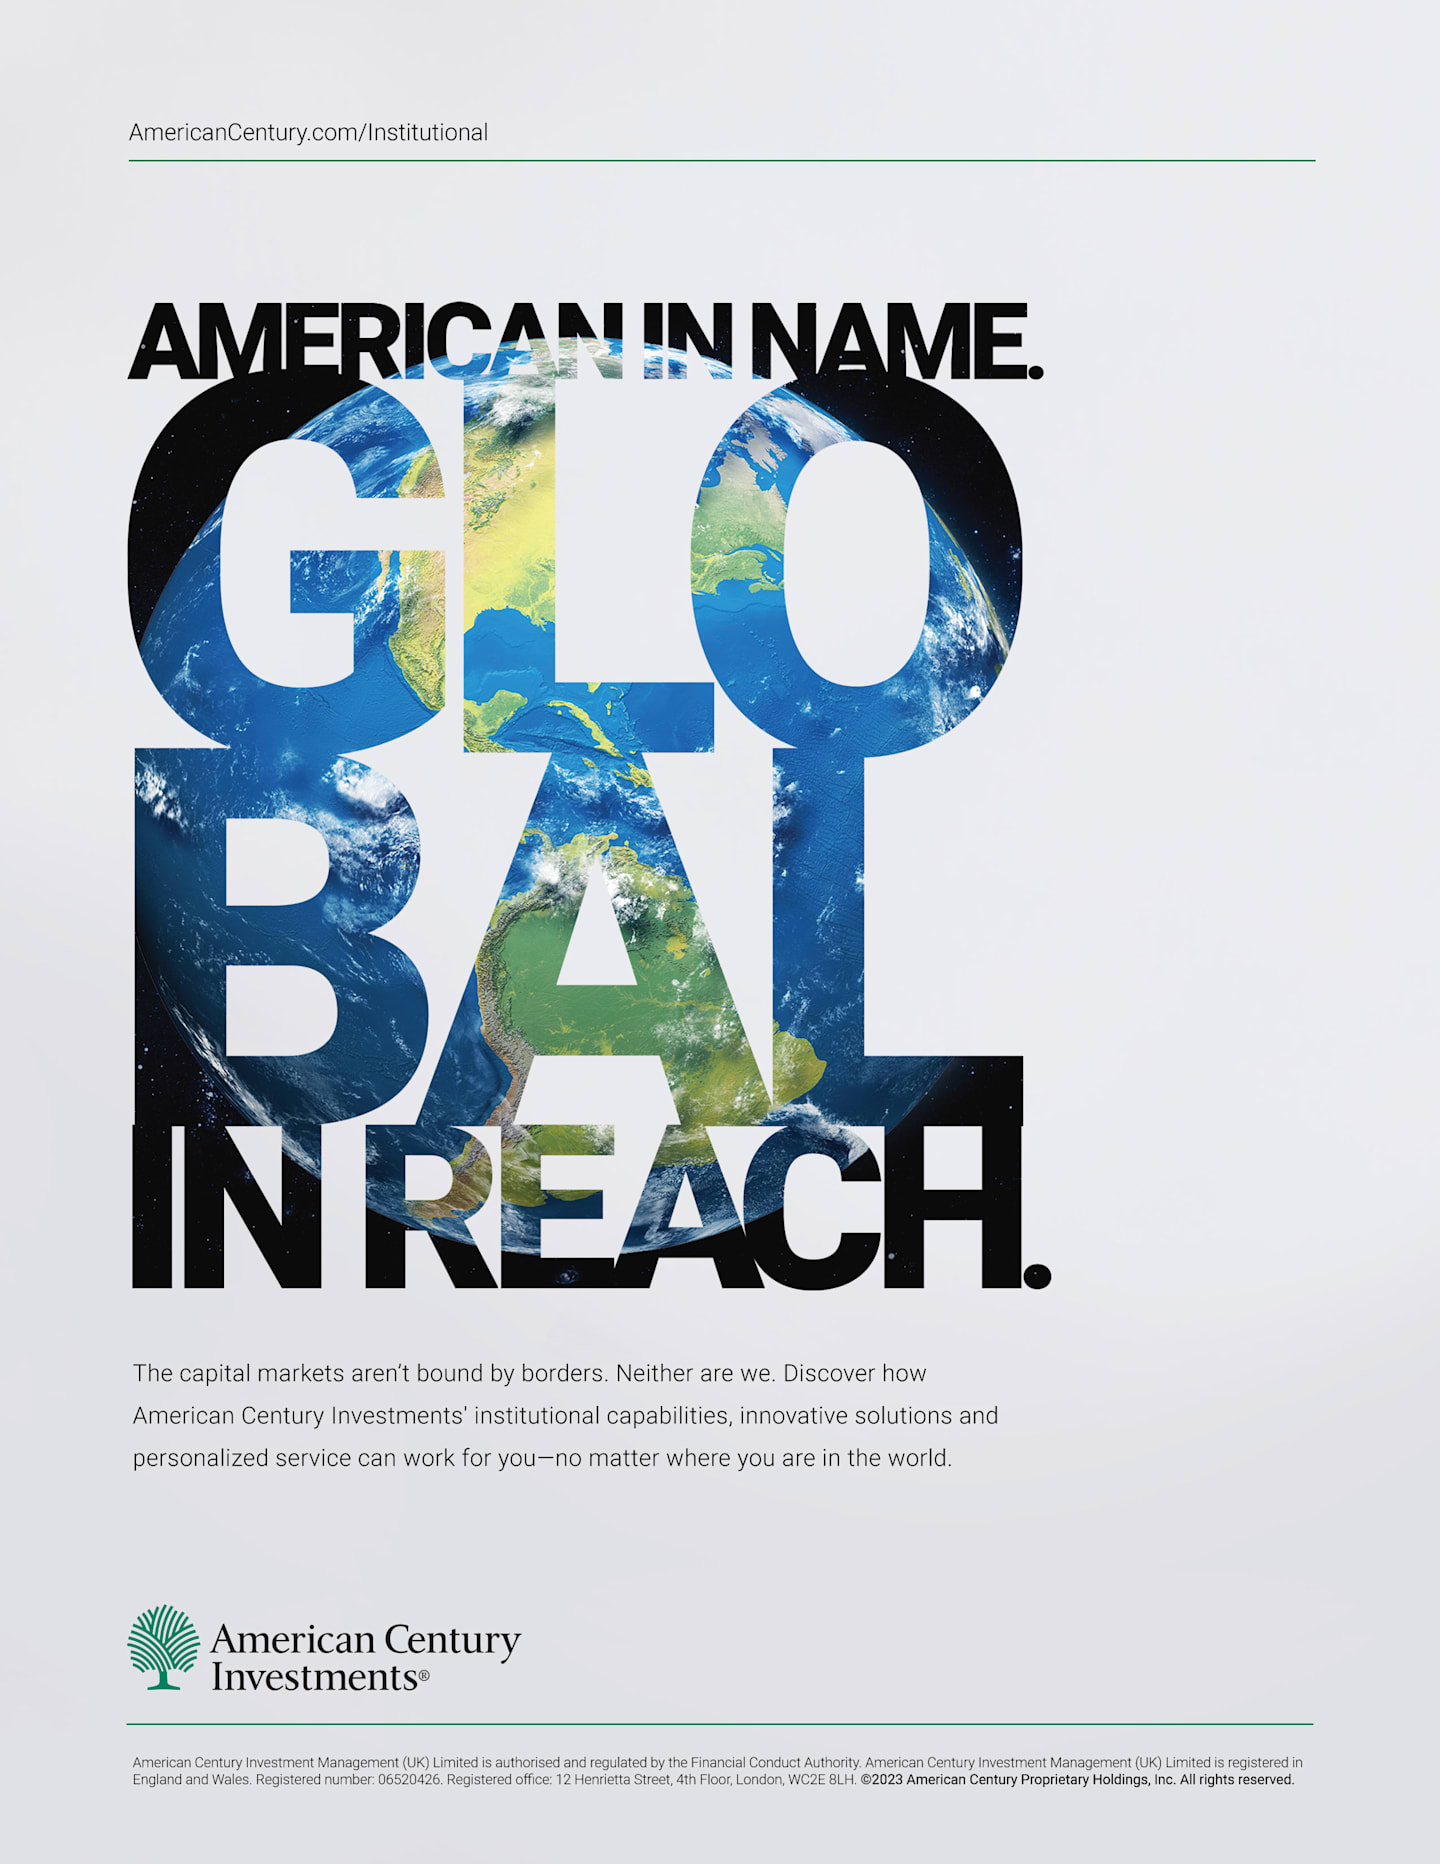 Print Ad for American in Name Only campaign.